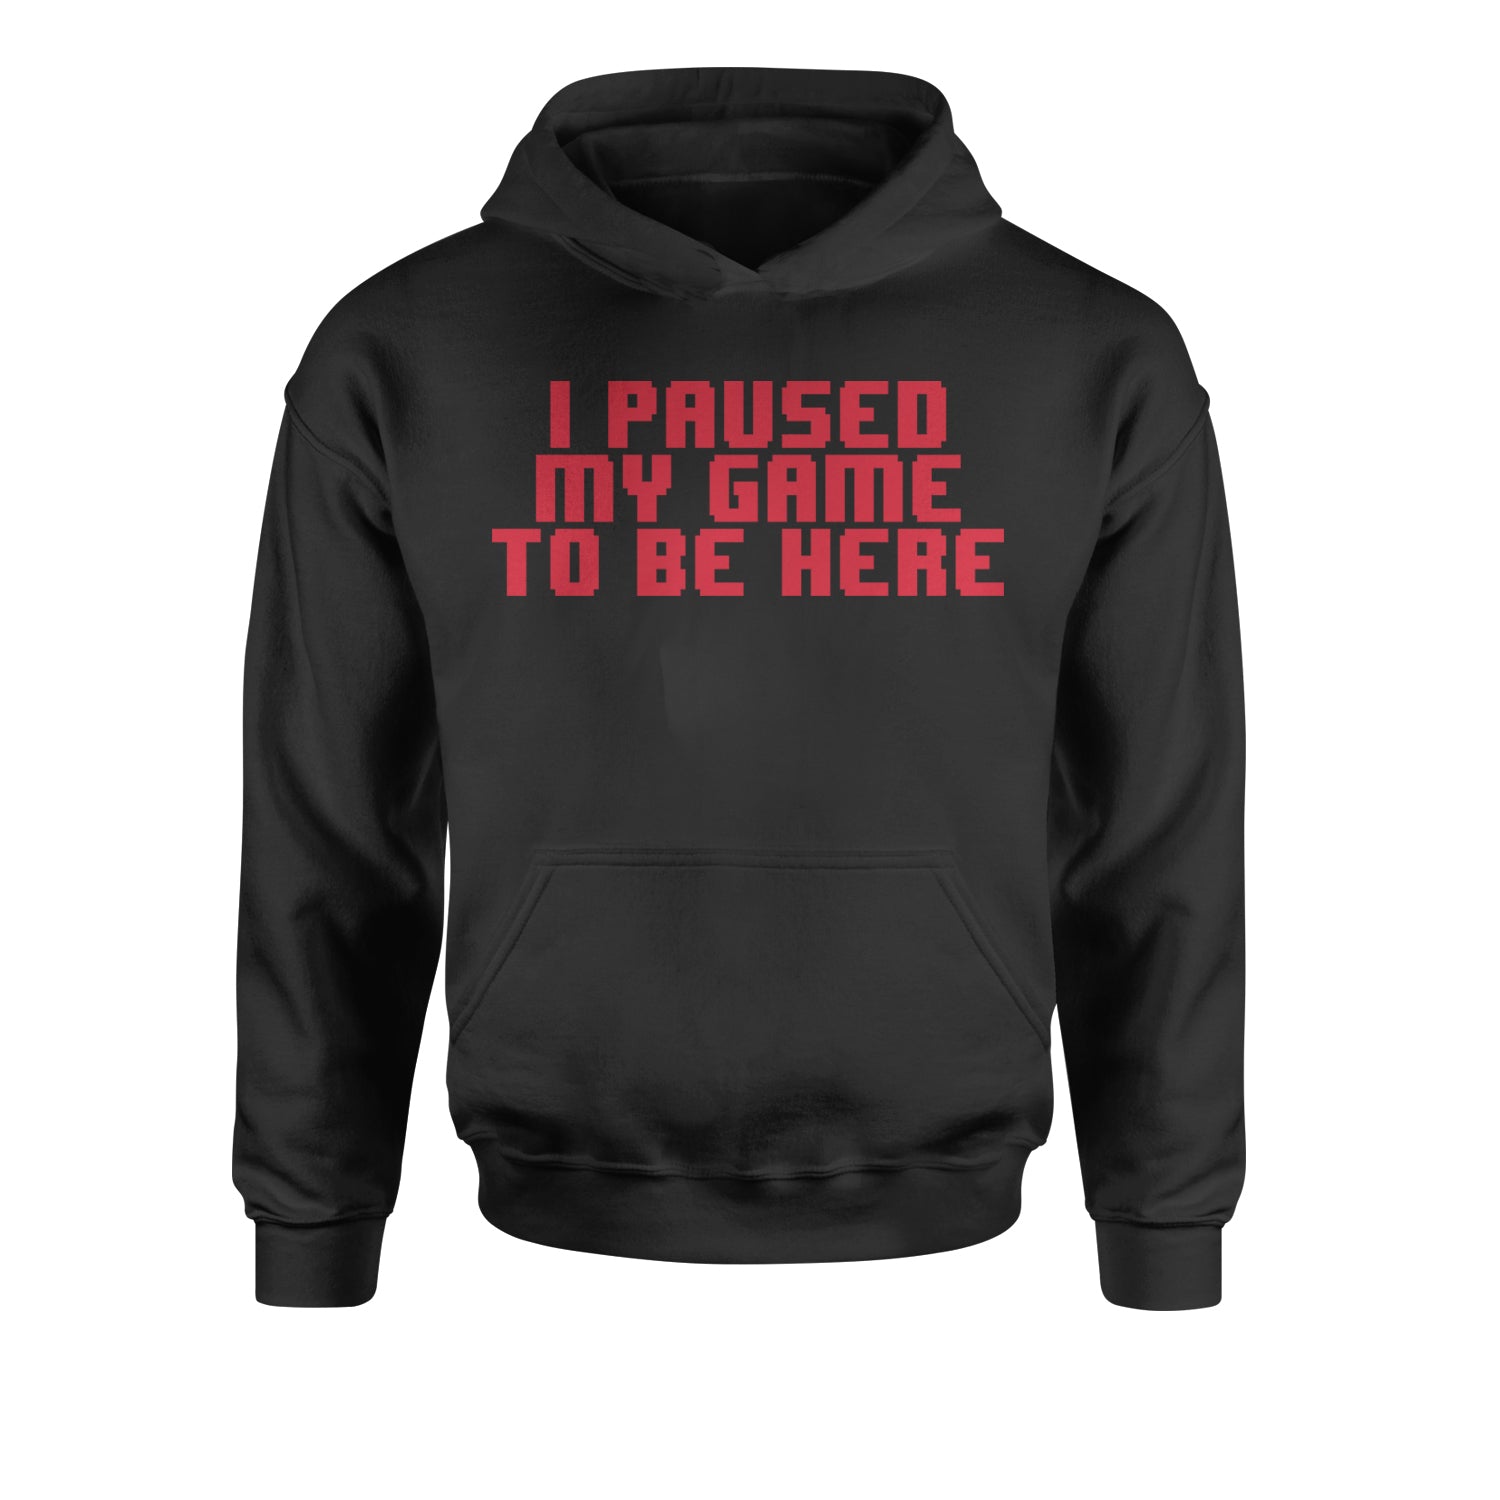 I Paused My Game To Be Here Funny Video Gamer Youth-Sized Hoodie